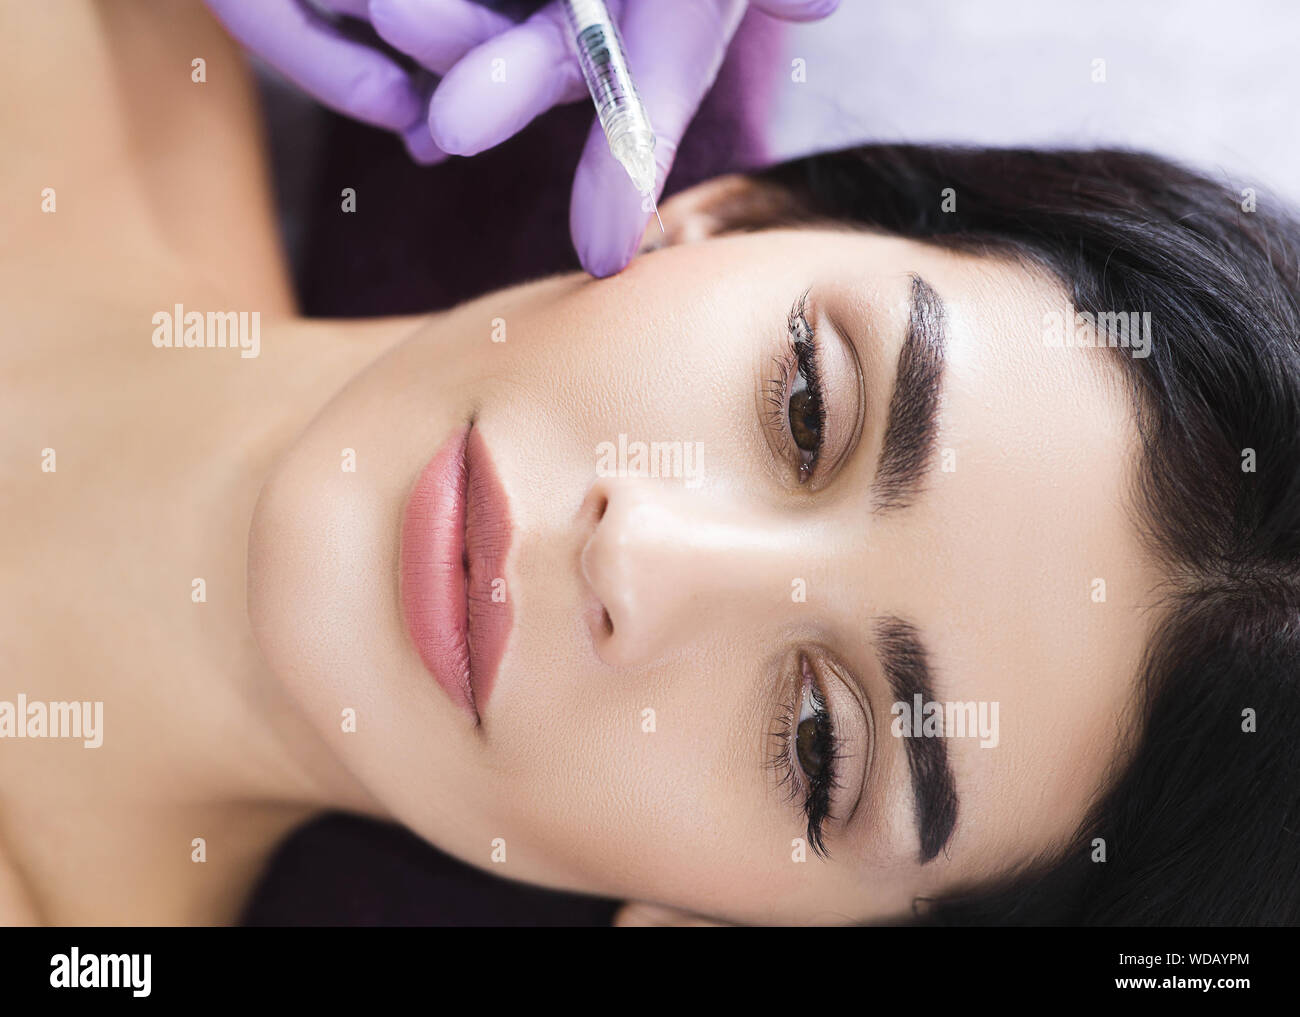 Cosmetic face treatment. Beautiful mid aged woman getting face injection, anti wrinkles effect, beauty injections for skin and face rejuvenation Stock Photo